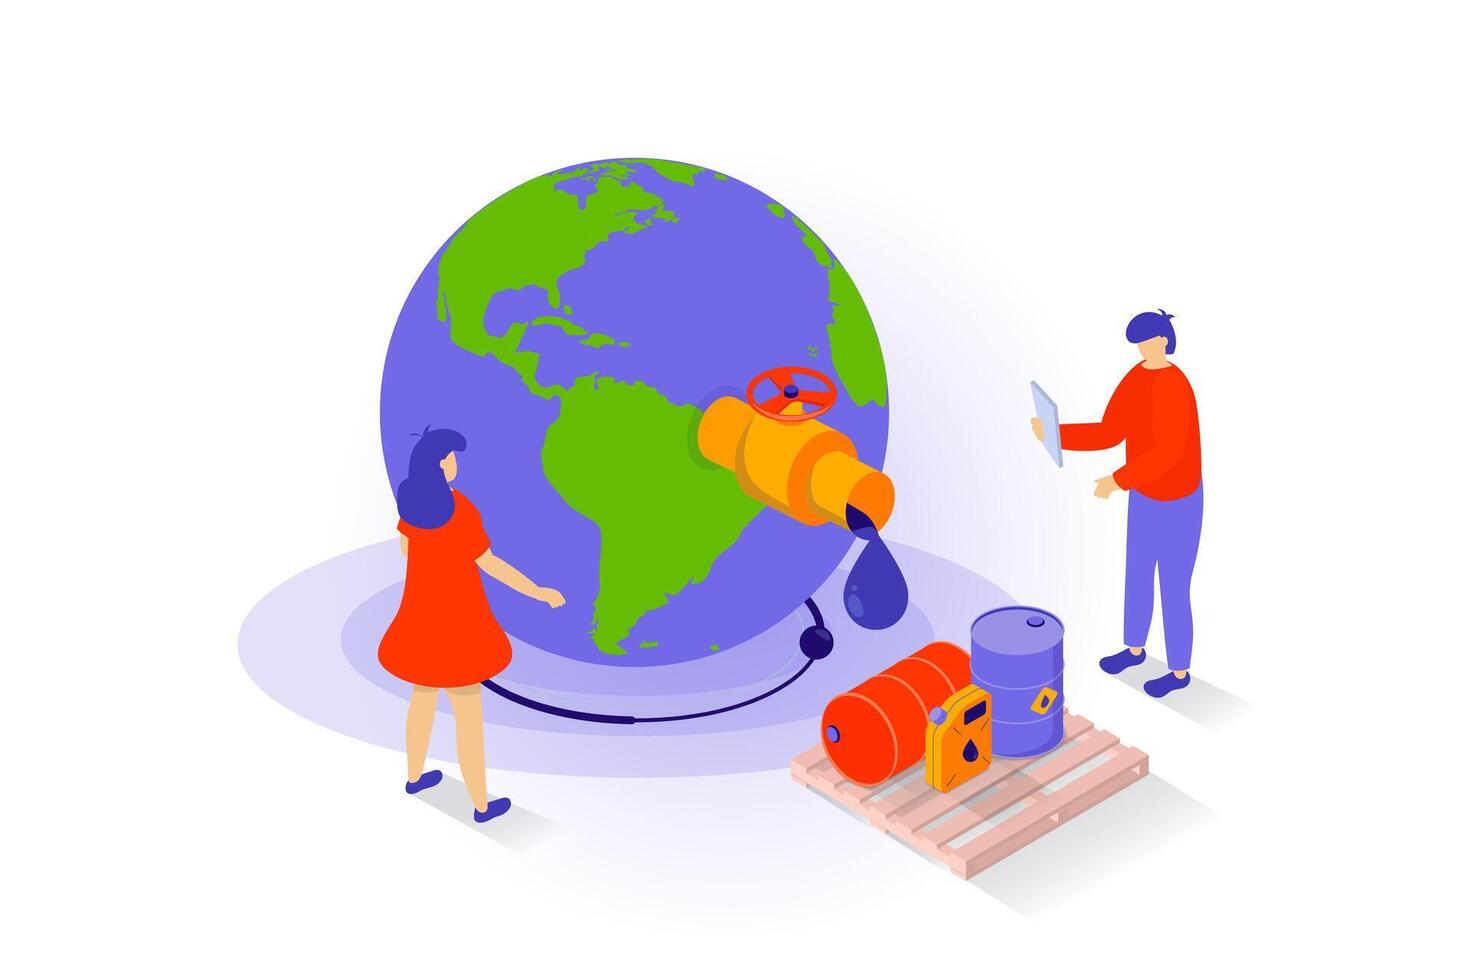 Oil industry concept in 3d isometric design. People selling petroleum products and transporting in barrels and canister to global fuel market. Vector illustration with isometry scene for web graphic